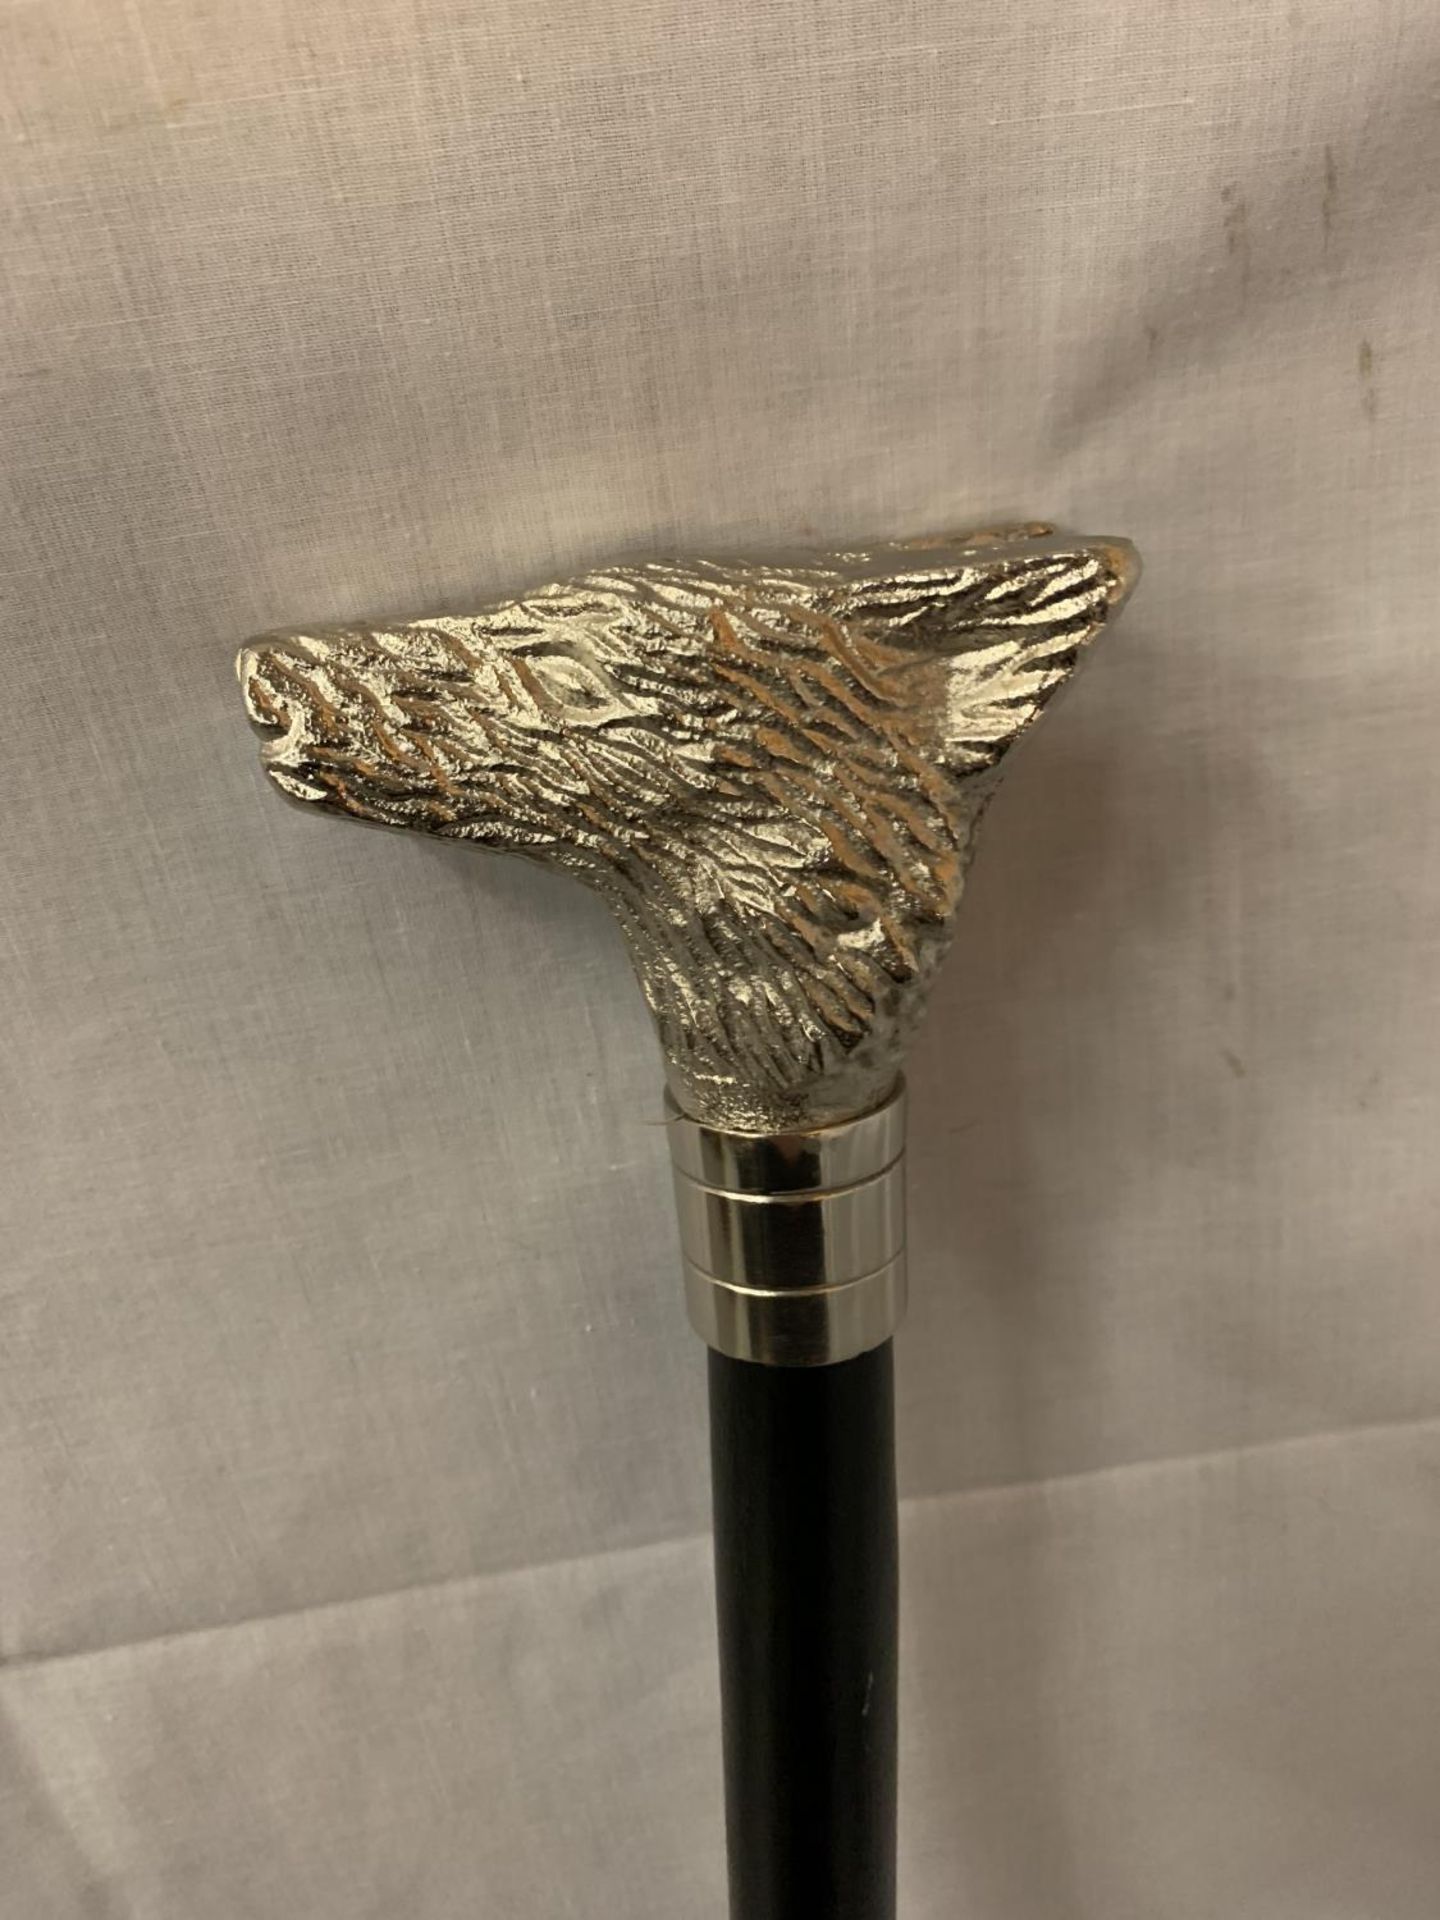 A WOODEN WALKING CANE WITH A SILVER COLOURED FOX HANDLE - Image 2 of 4